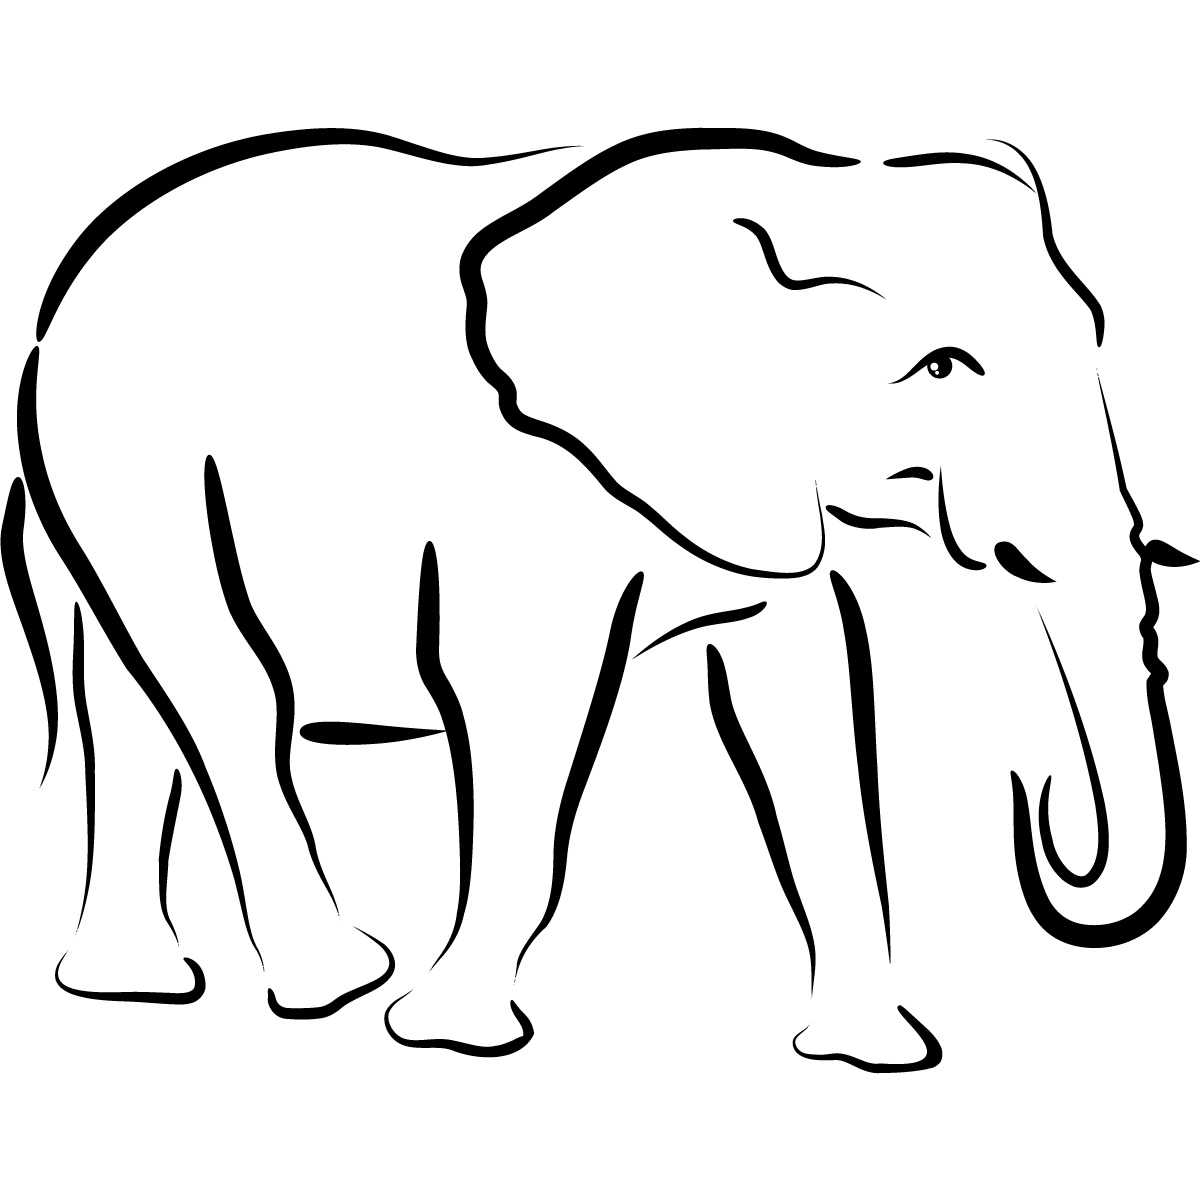 Free Simple Elephant Outline, Download Free Clip Art, Free Intended For Blank Elephant Template